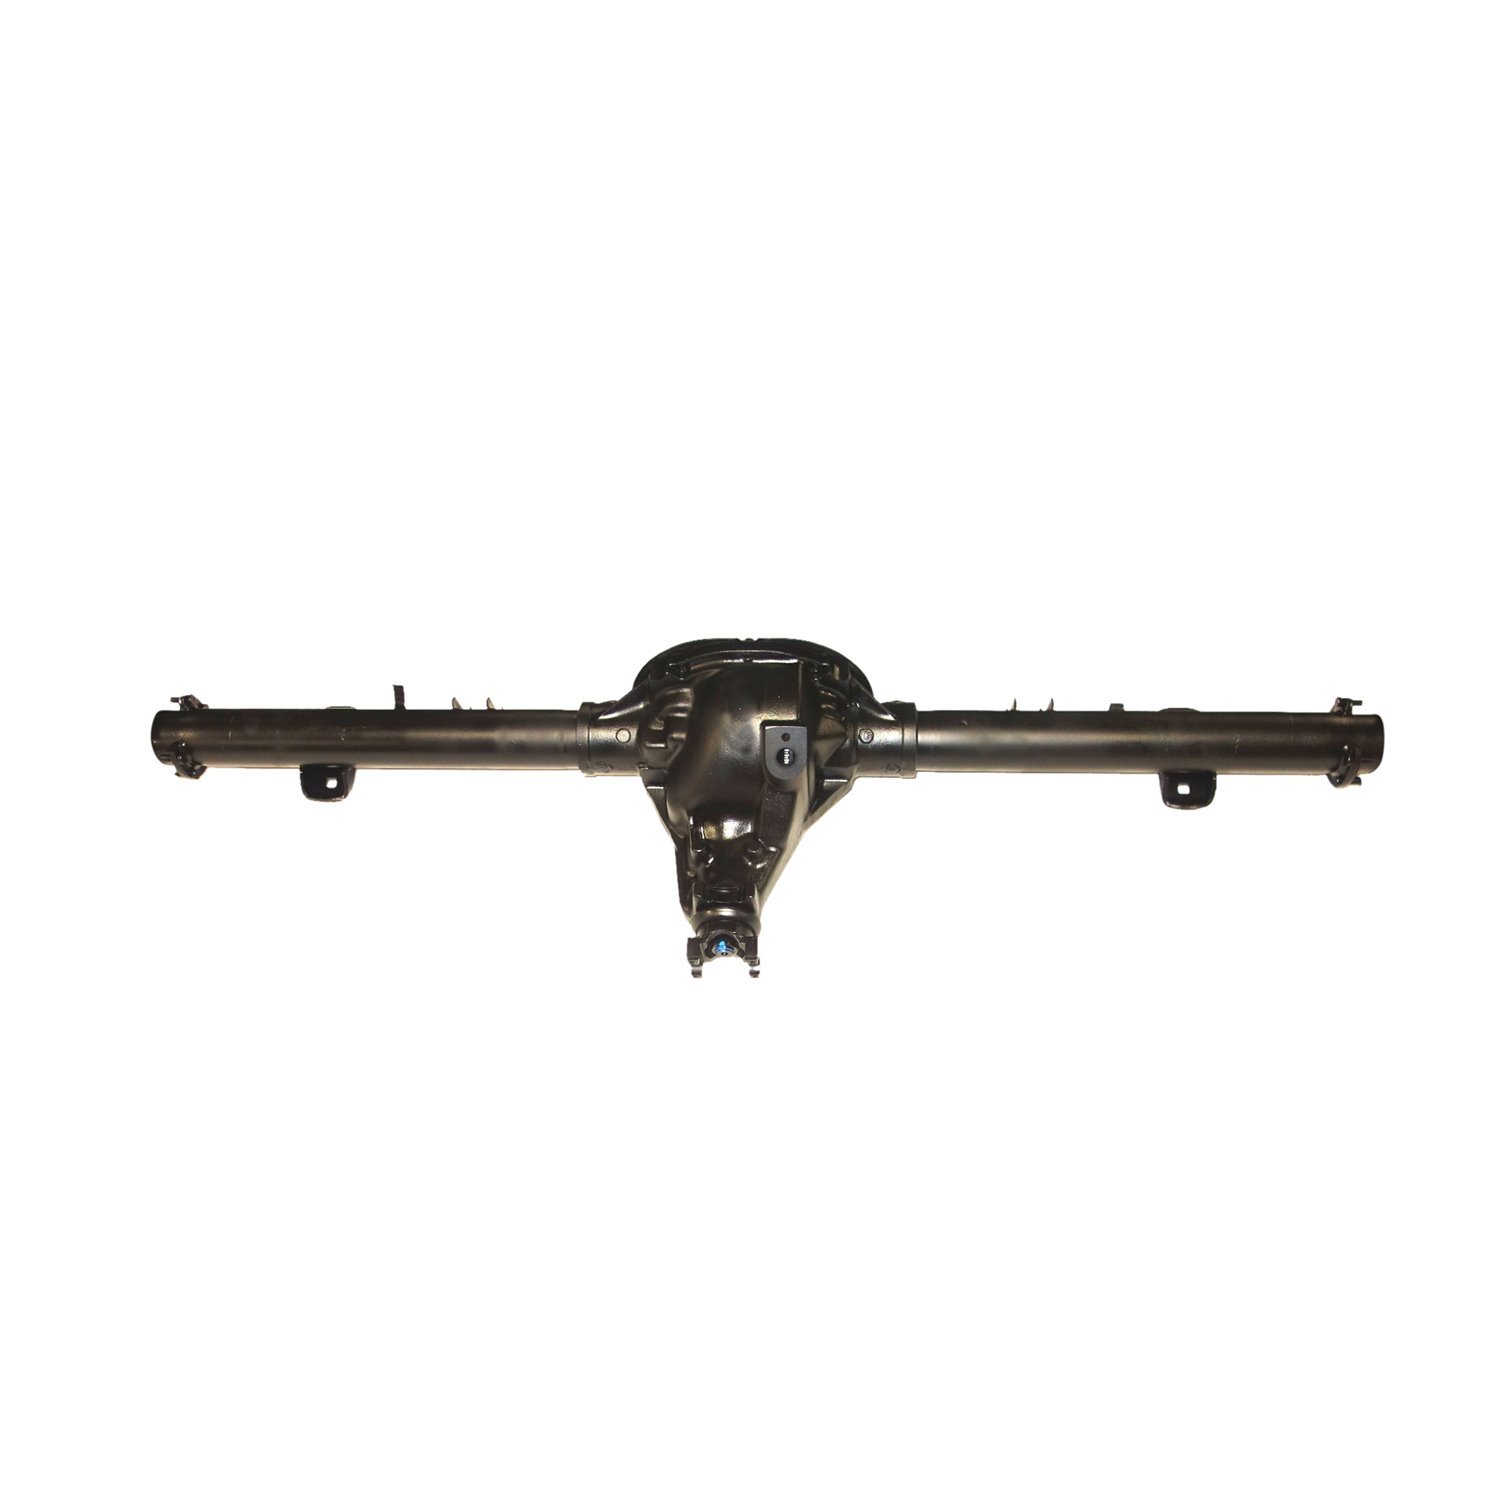 Remanufactured Axle Assy for Chy 8.25" 89-93 Dodge 1/2 Ton, D100, D150 3.90 , 2wd w/ ABS